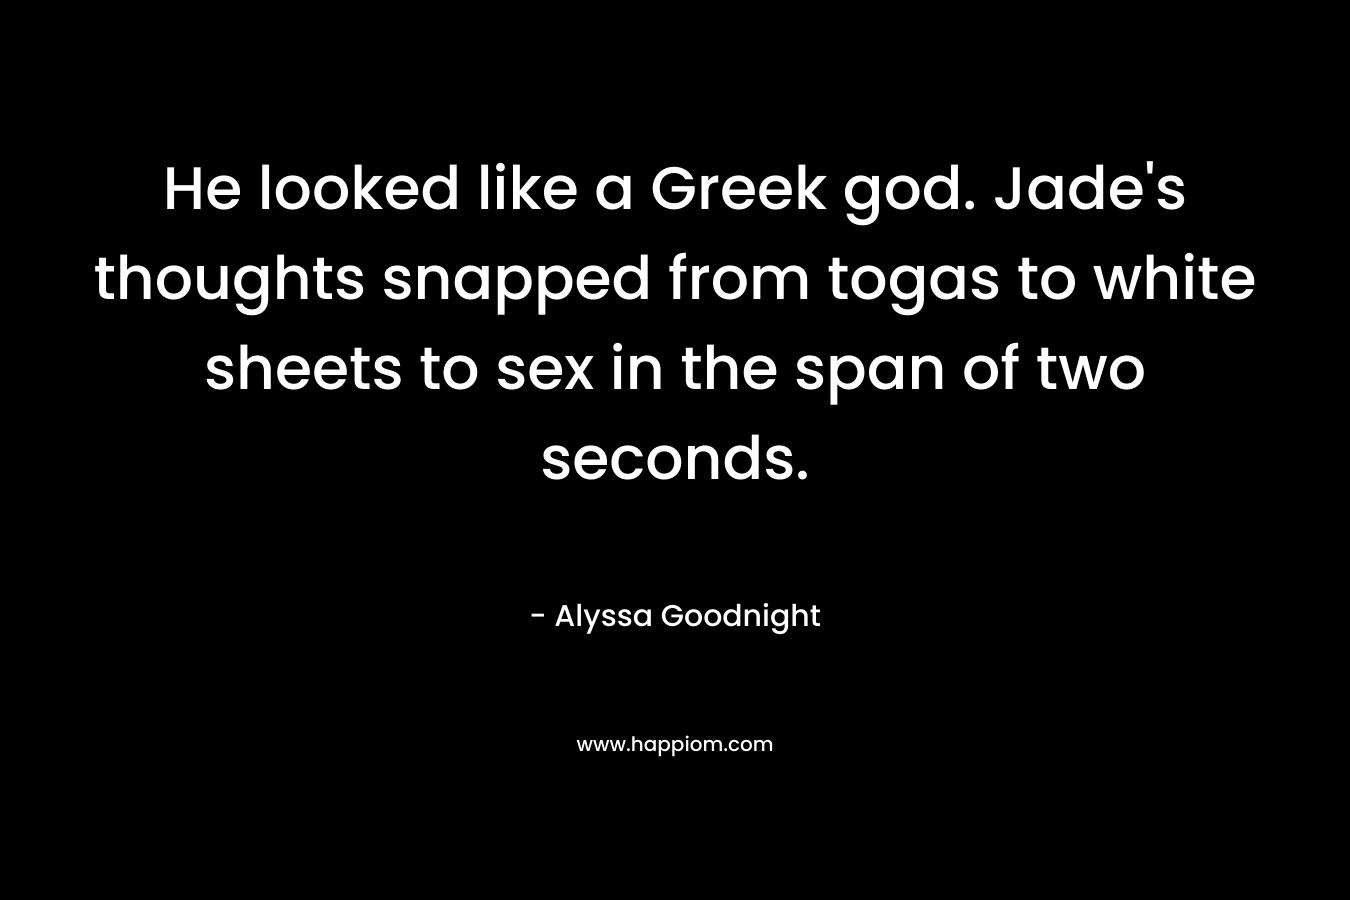 He looked like a Greek god. Jade's thoughts snapped from togas to white sheets to sex in the span of two seconds.